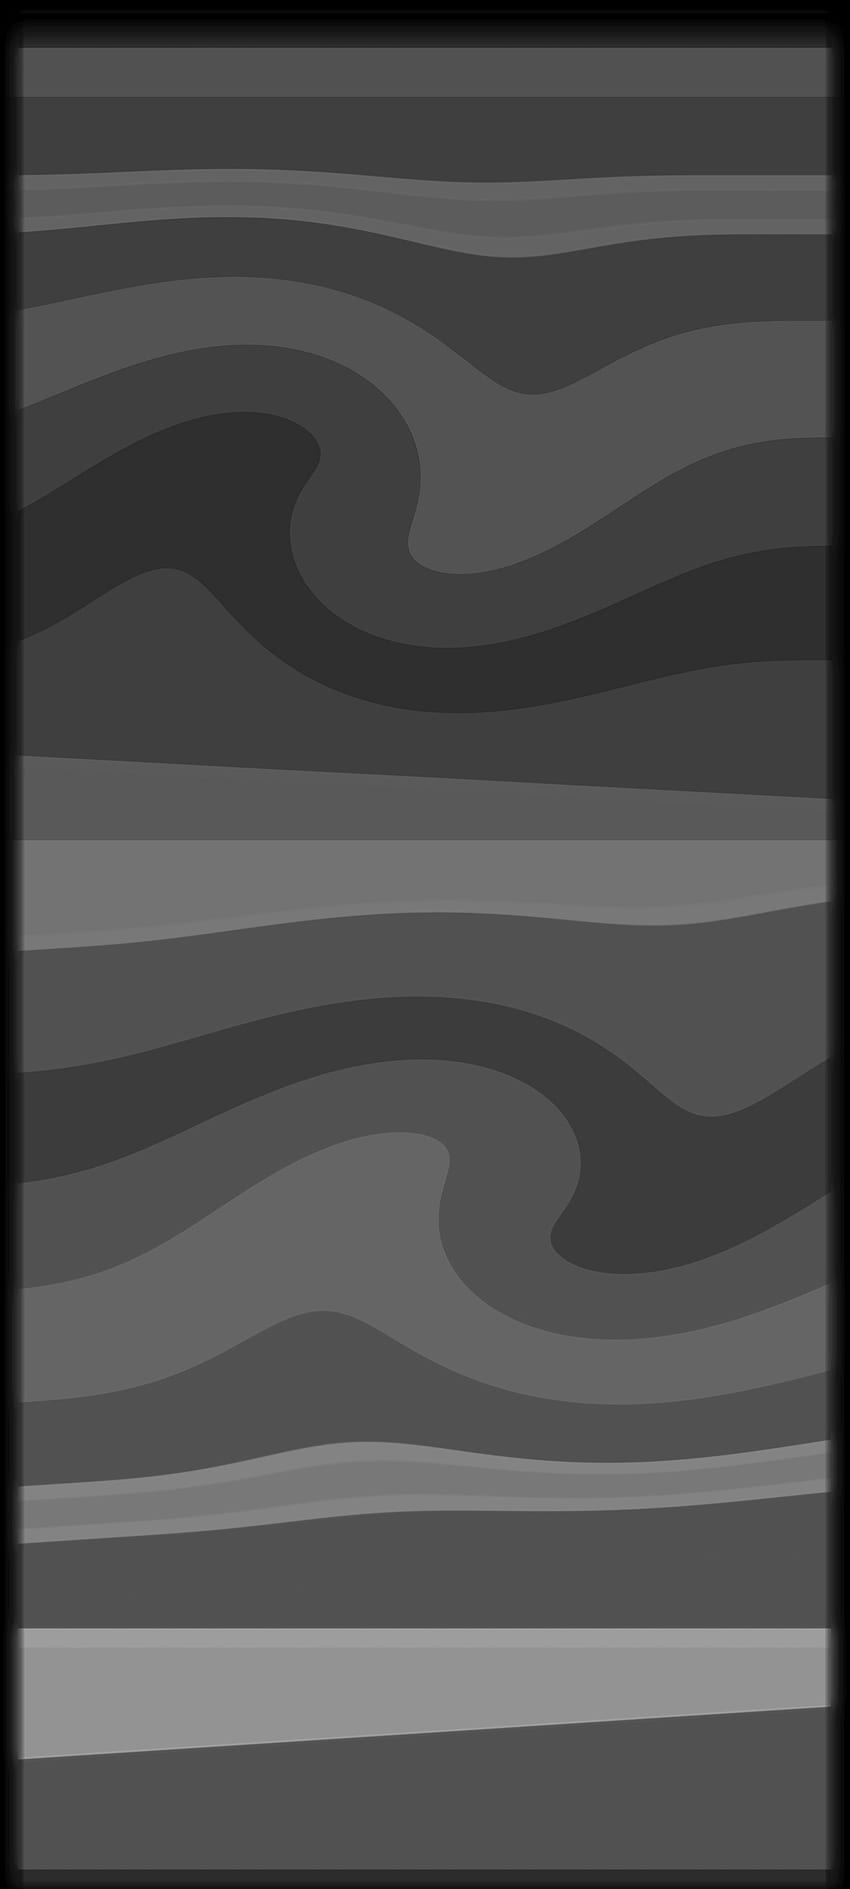 Grey Safari, iPhone, Basic, Galaxy, New, Art, iPhone 13, Zebra, pattern, Cool, Modern, Surface, , design, Smooth, locked, A51, Background, Galaxy S21, Druffix, 2021, M32, Magma, Android, Acer, No1, Apple, Colors, S10, Galaxy A32, Love, LG, Samsung, Edge, Nokia, Original, Smartphone HD phone wallpaper